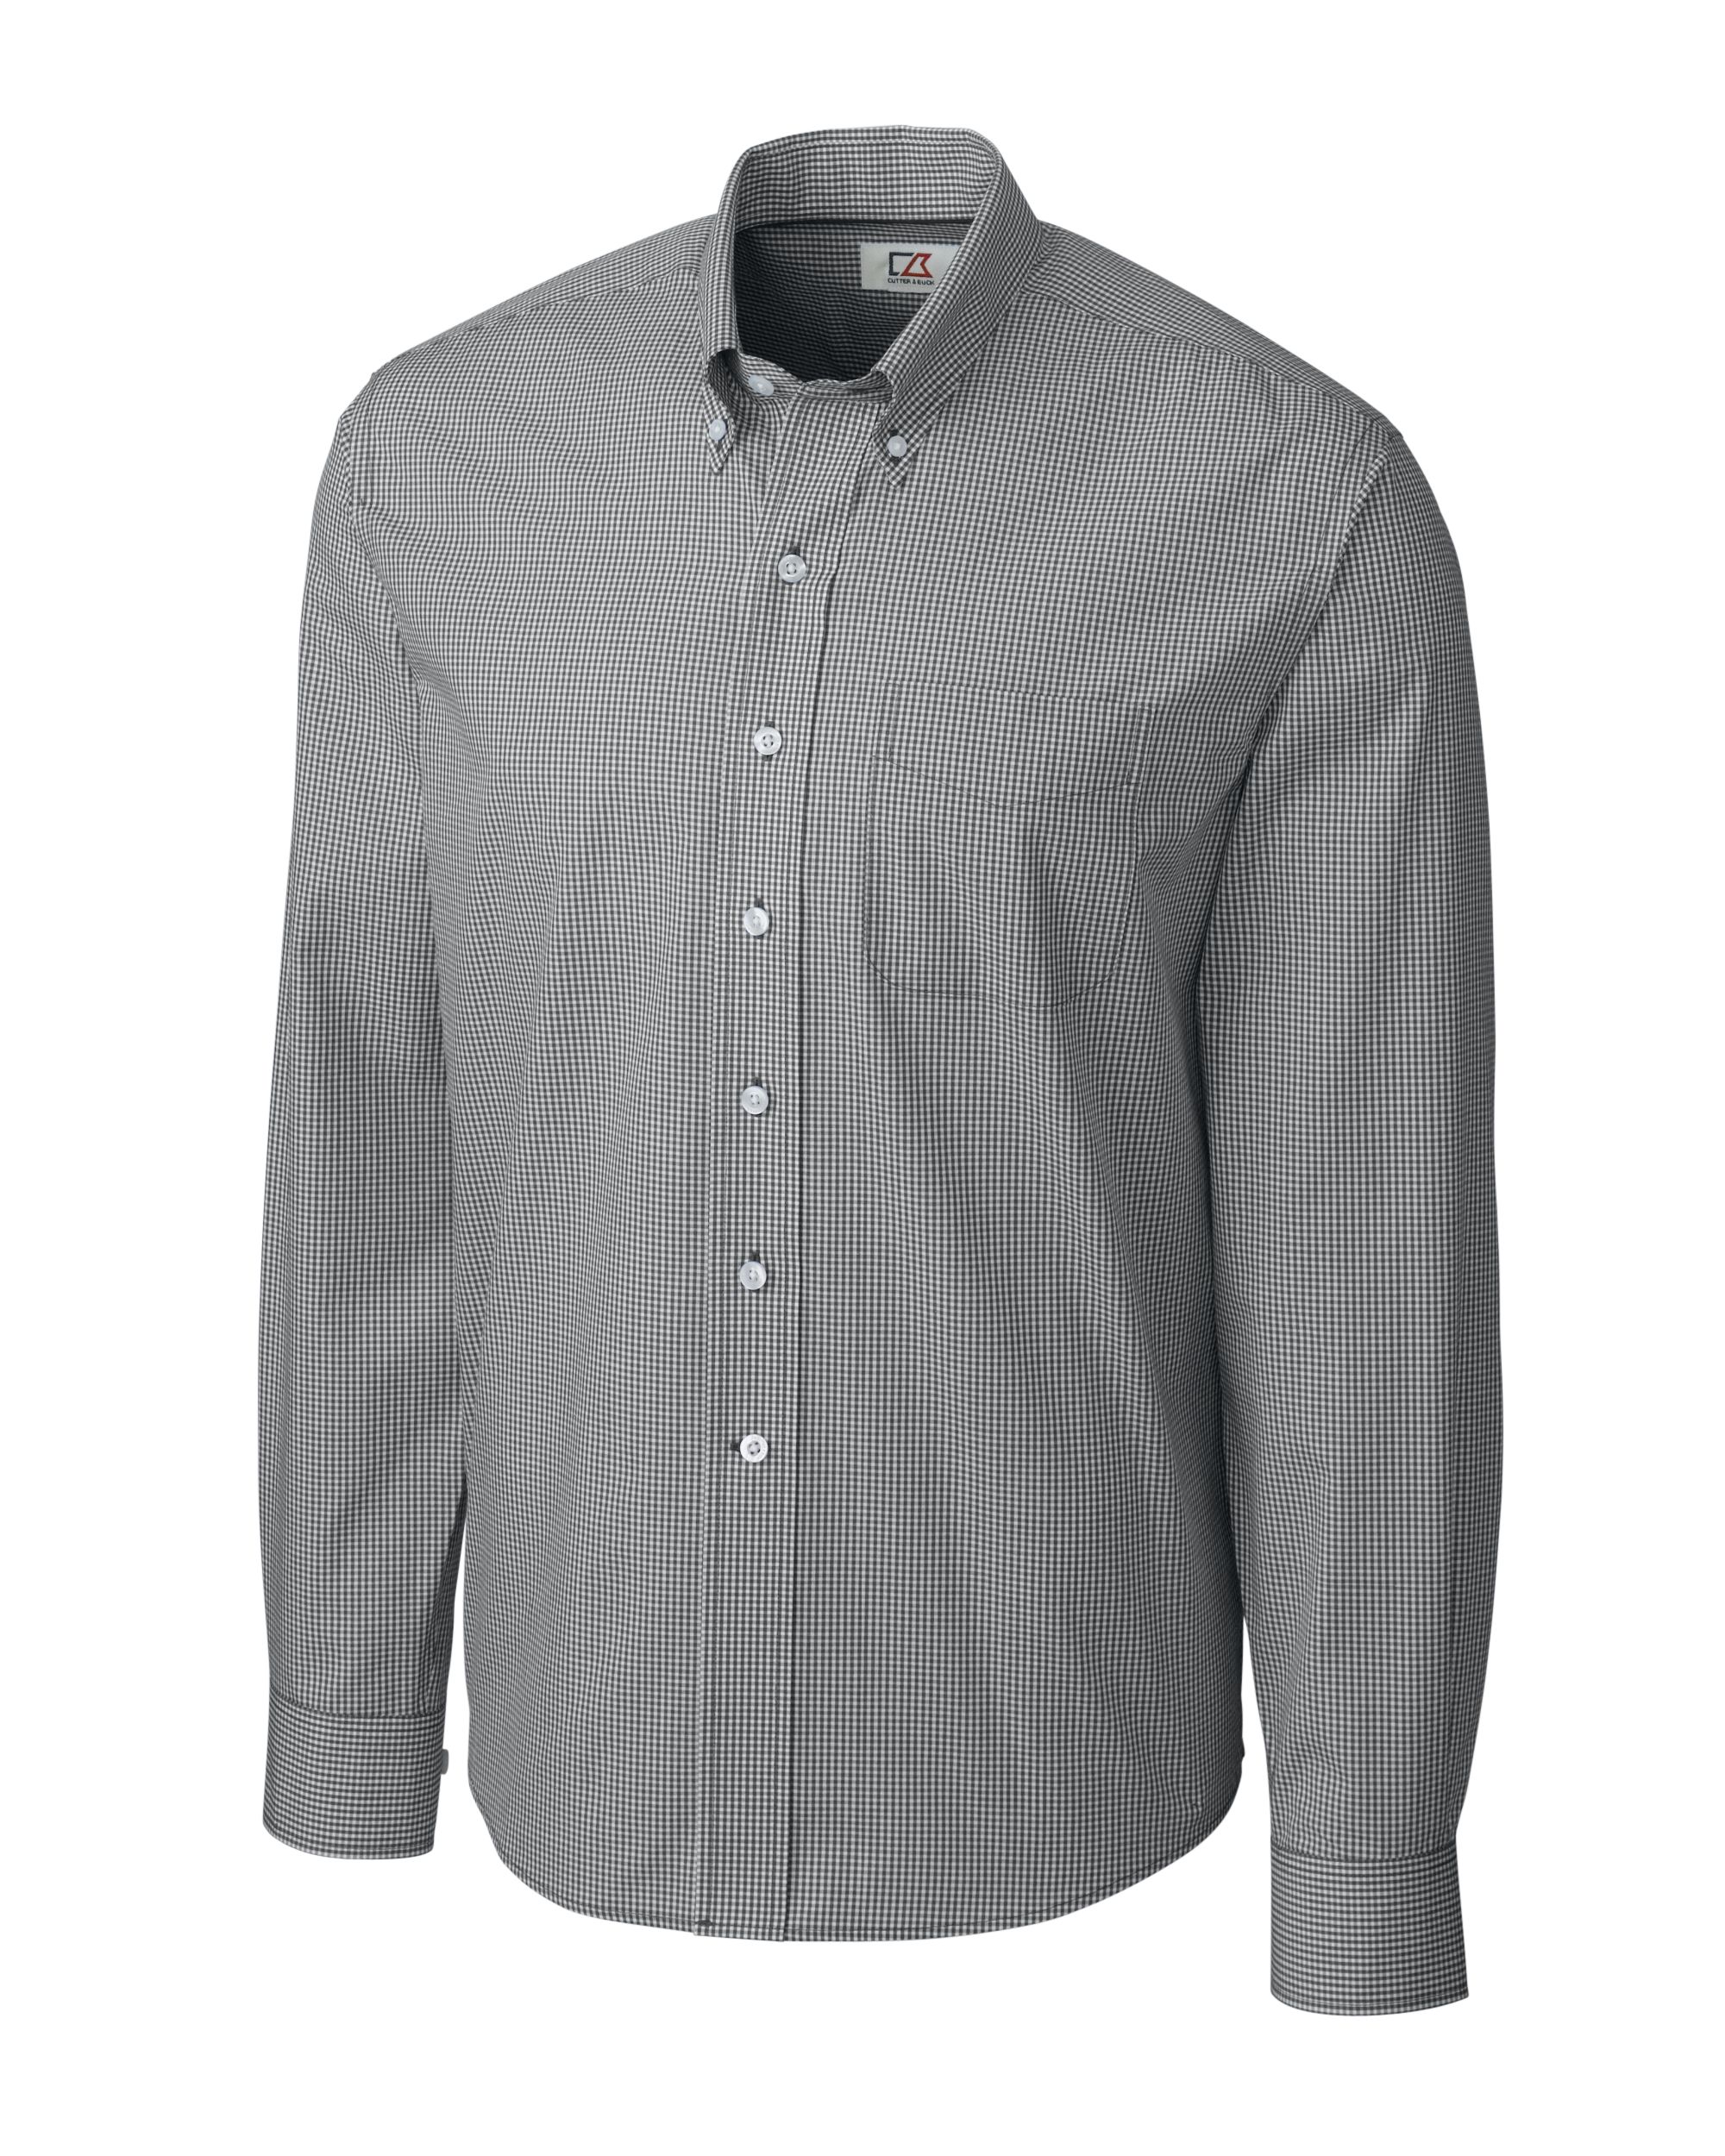 Men's Big and Tall Long sleeve Epic Easy Care Gingham, Charcoal - XXXL - image 1 of 2